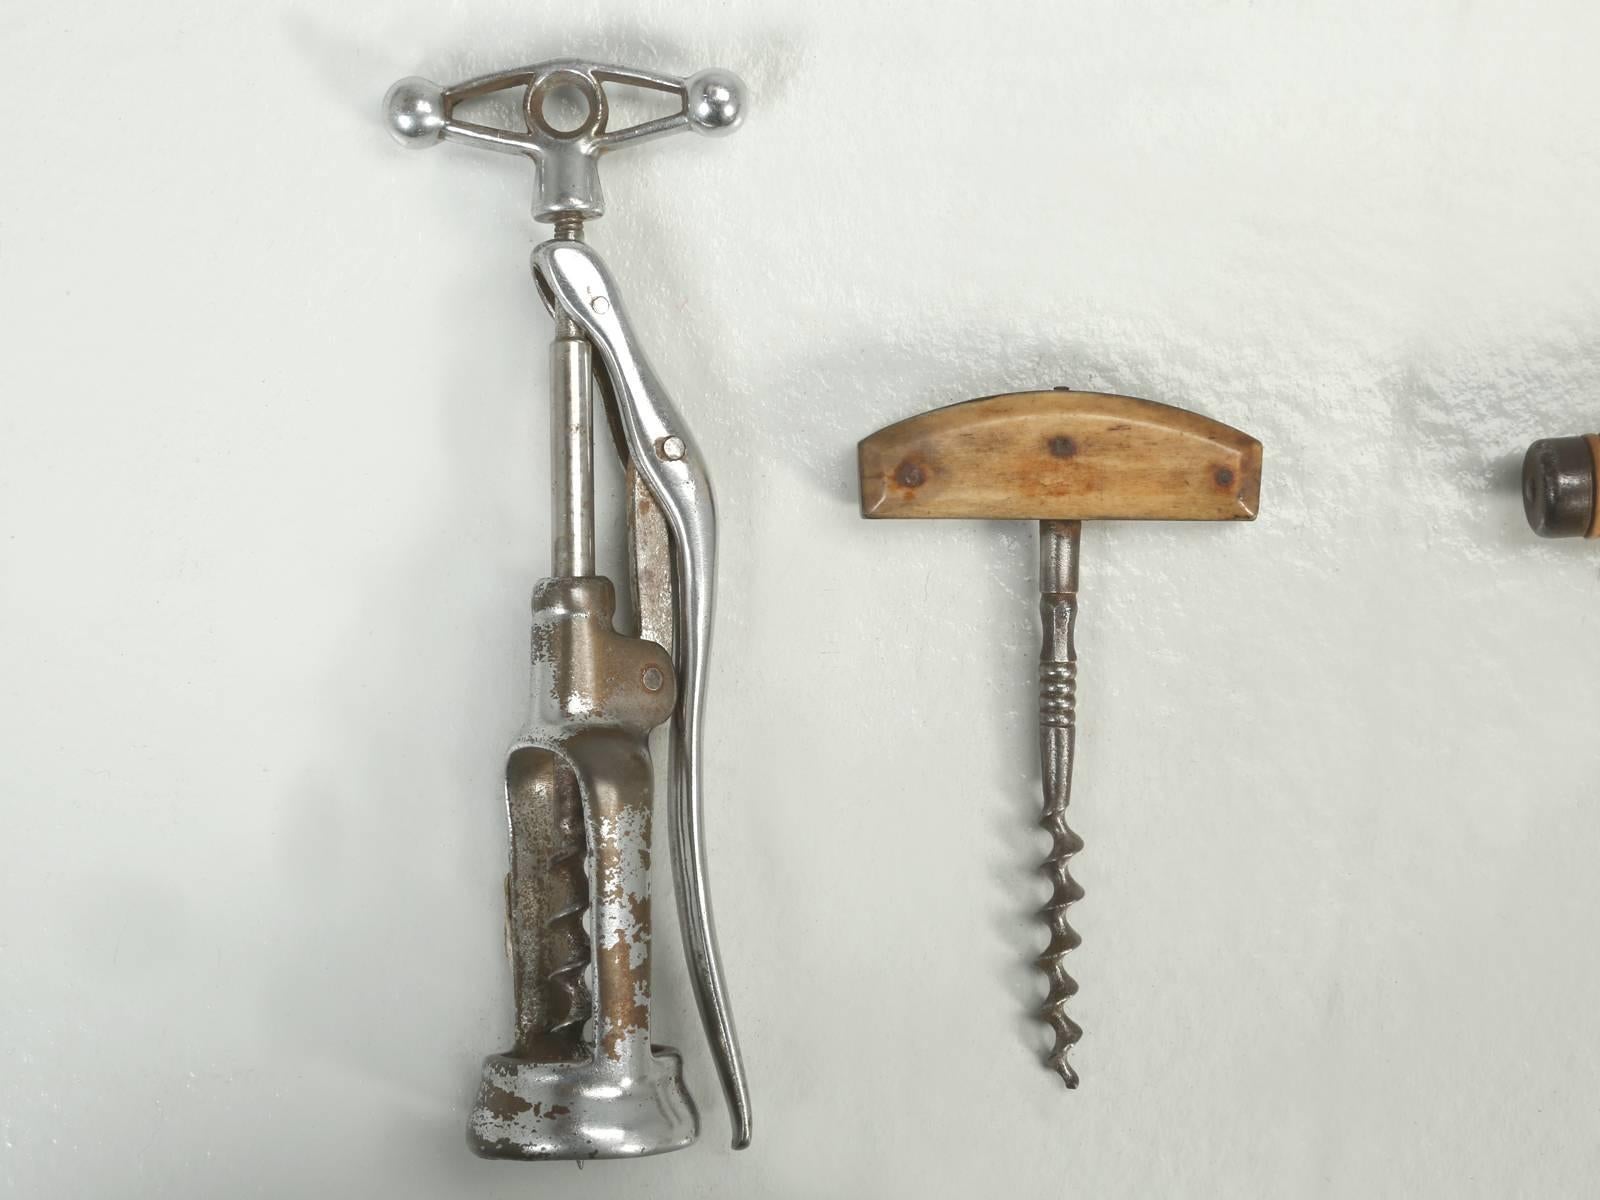 Very nice collection of (12) vintage and antique French corkscrews. They would wonderful in a shadow box, mounted on the wall of a wine room.
Measurements provided are for the corkscrew on the bottom right.